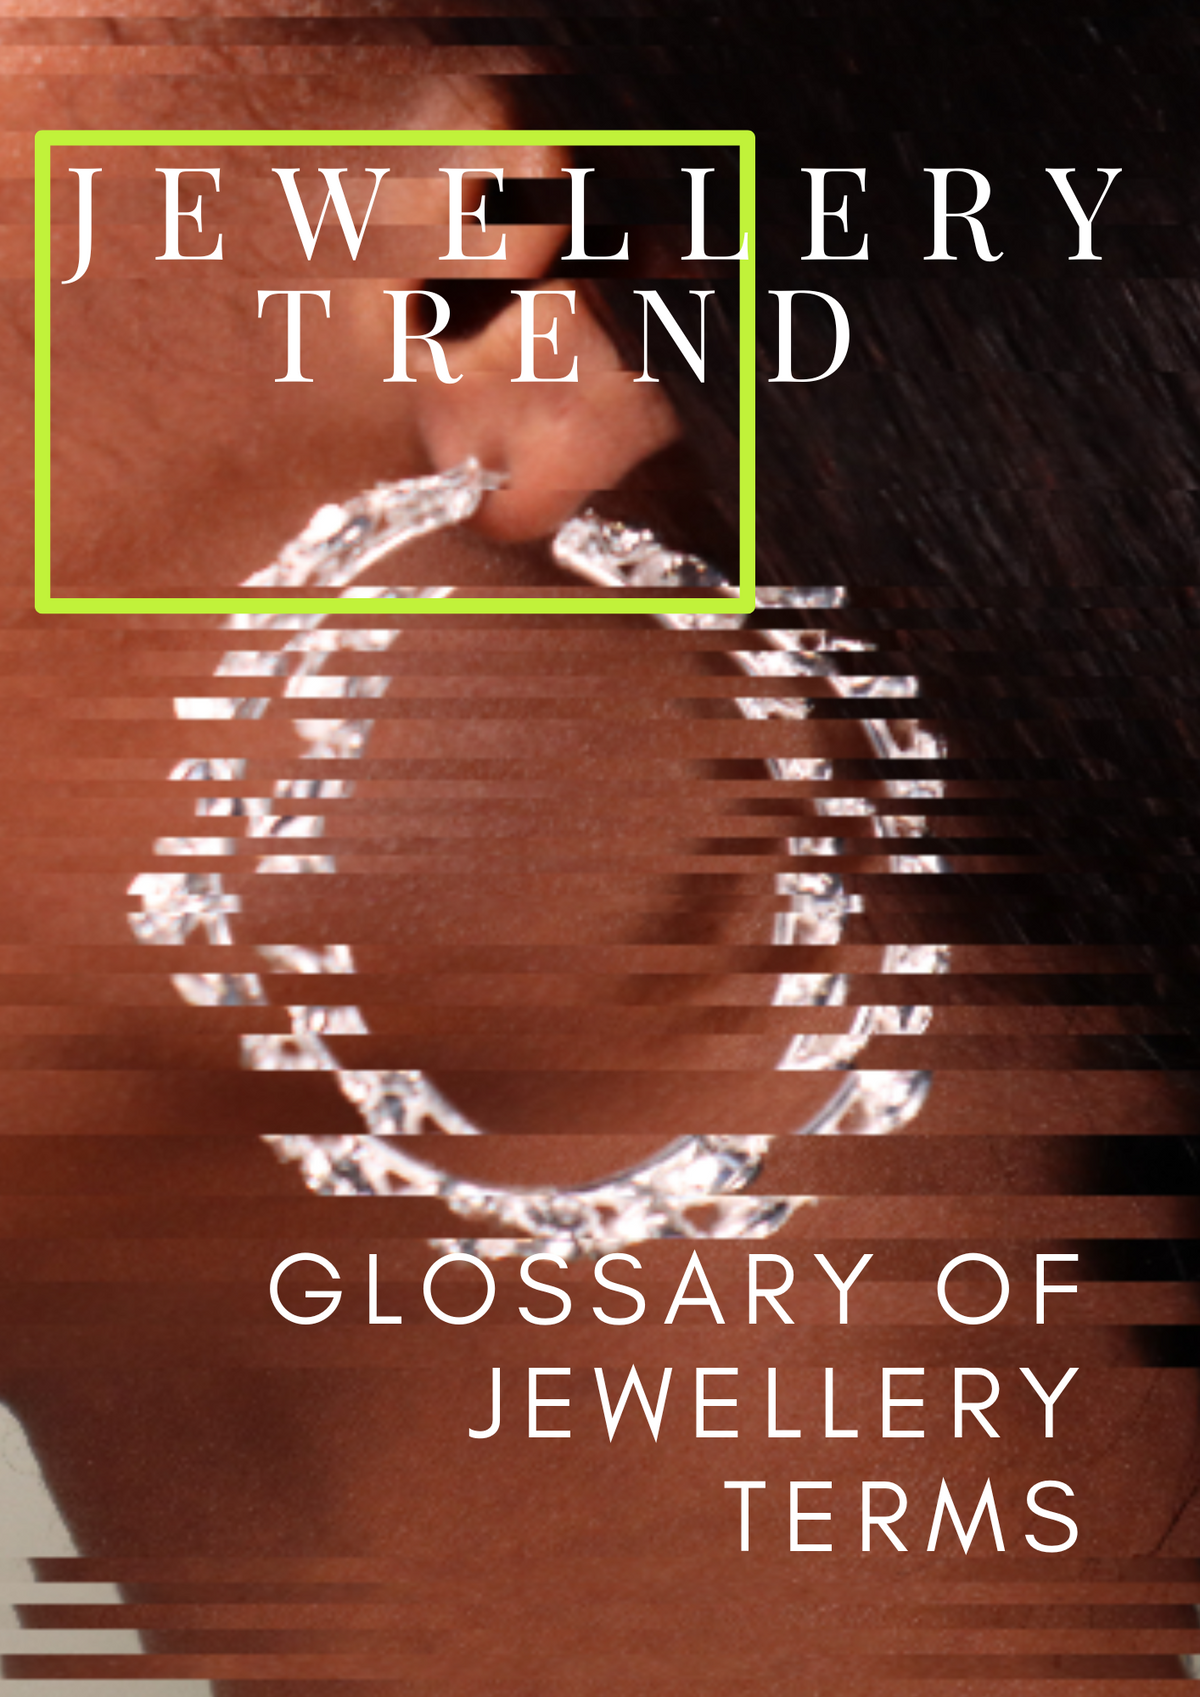 Jewellery Trend Know Your Stuff Glossary Of Jewellery Terms